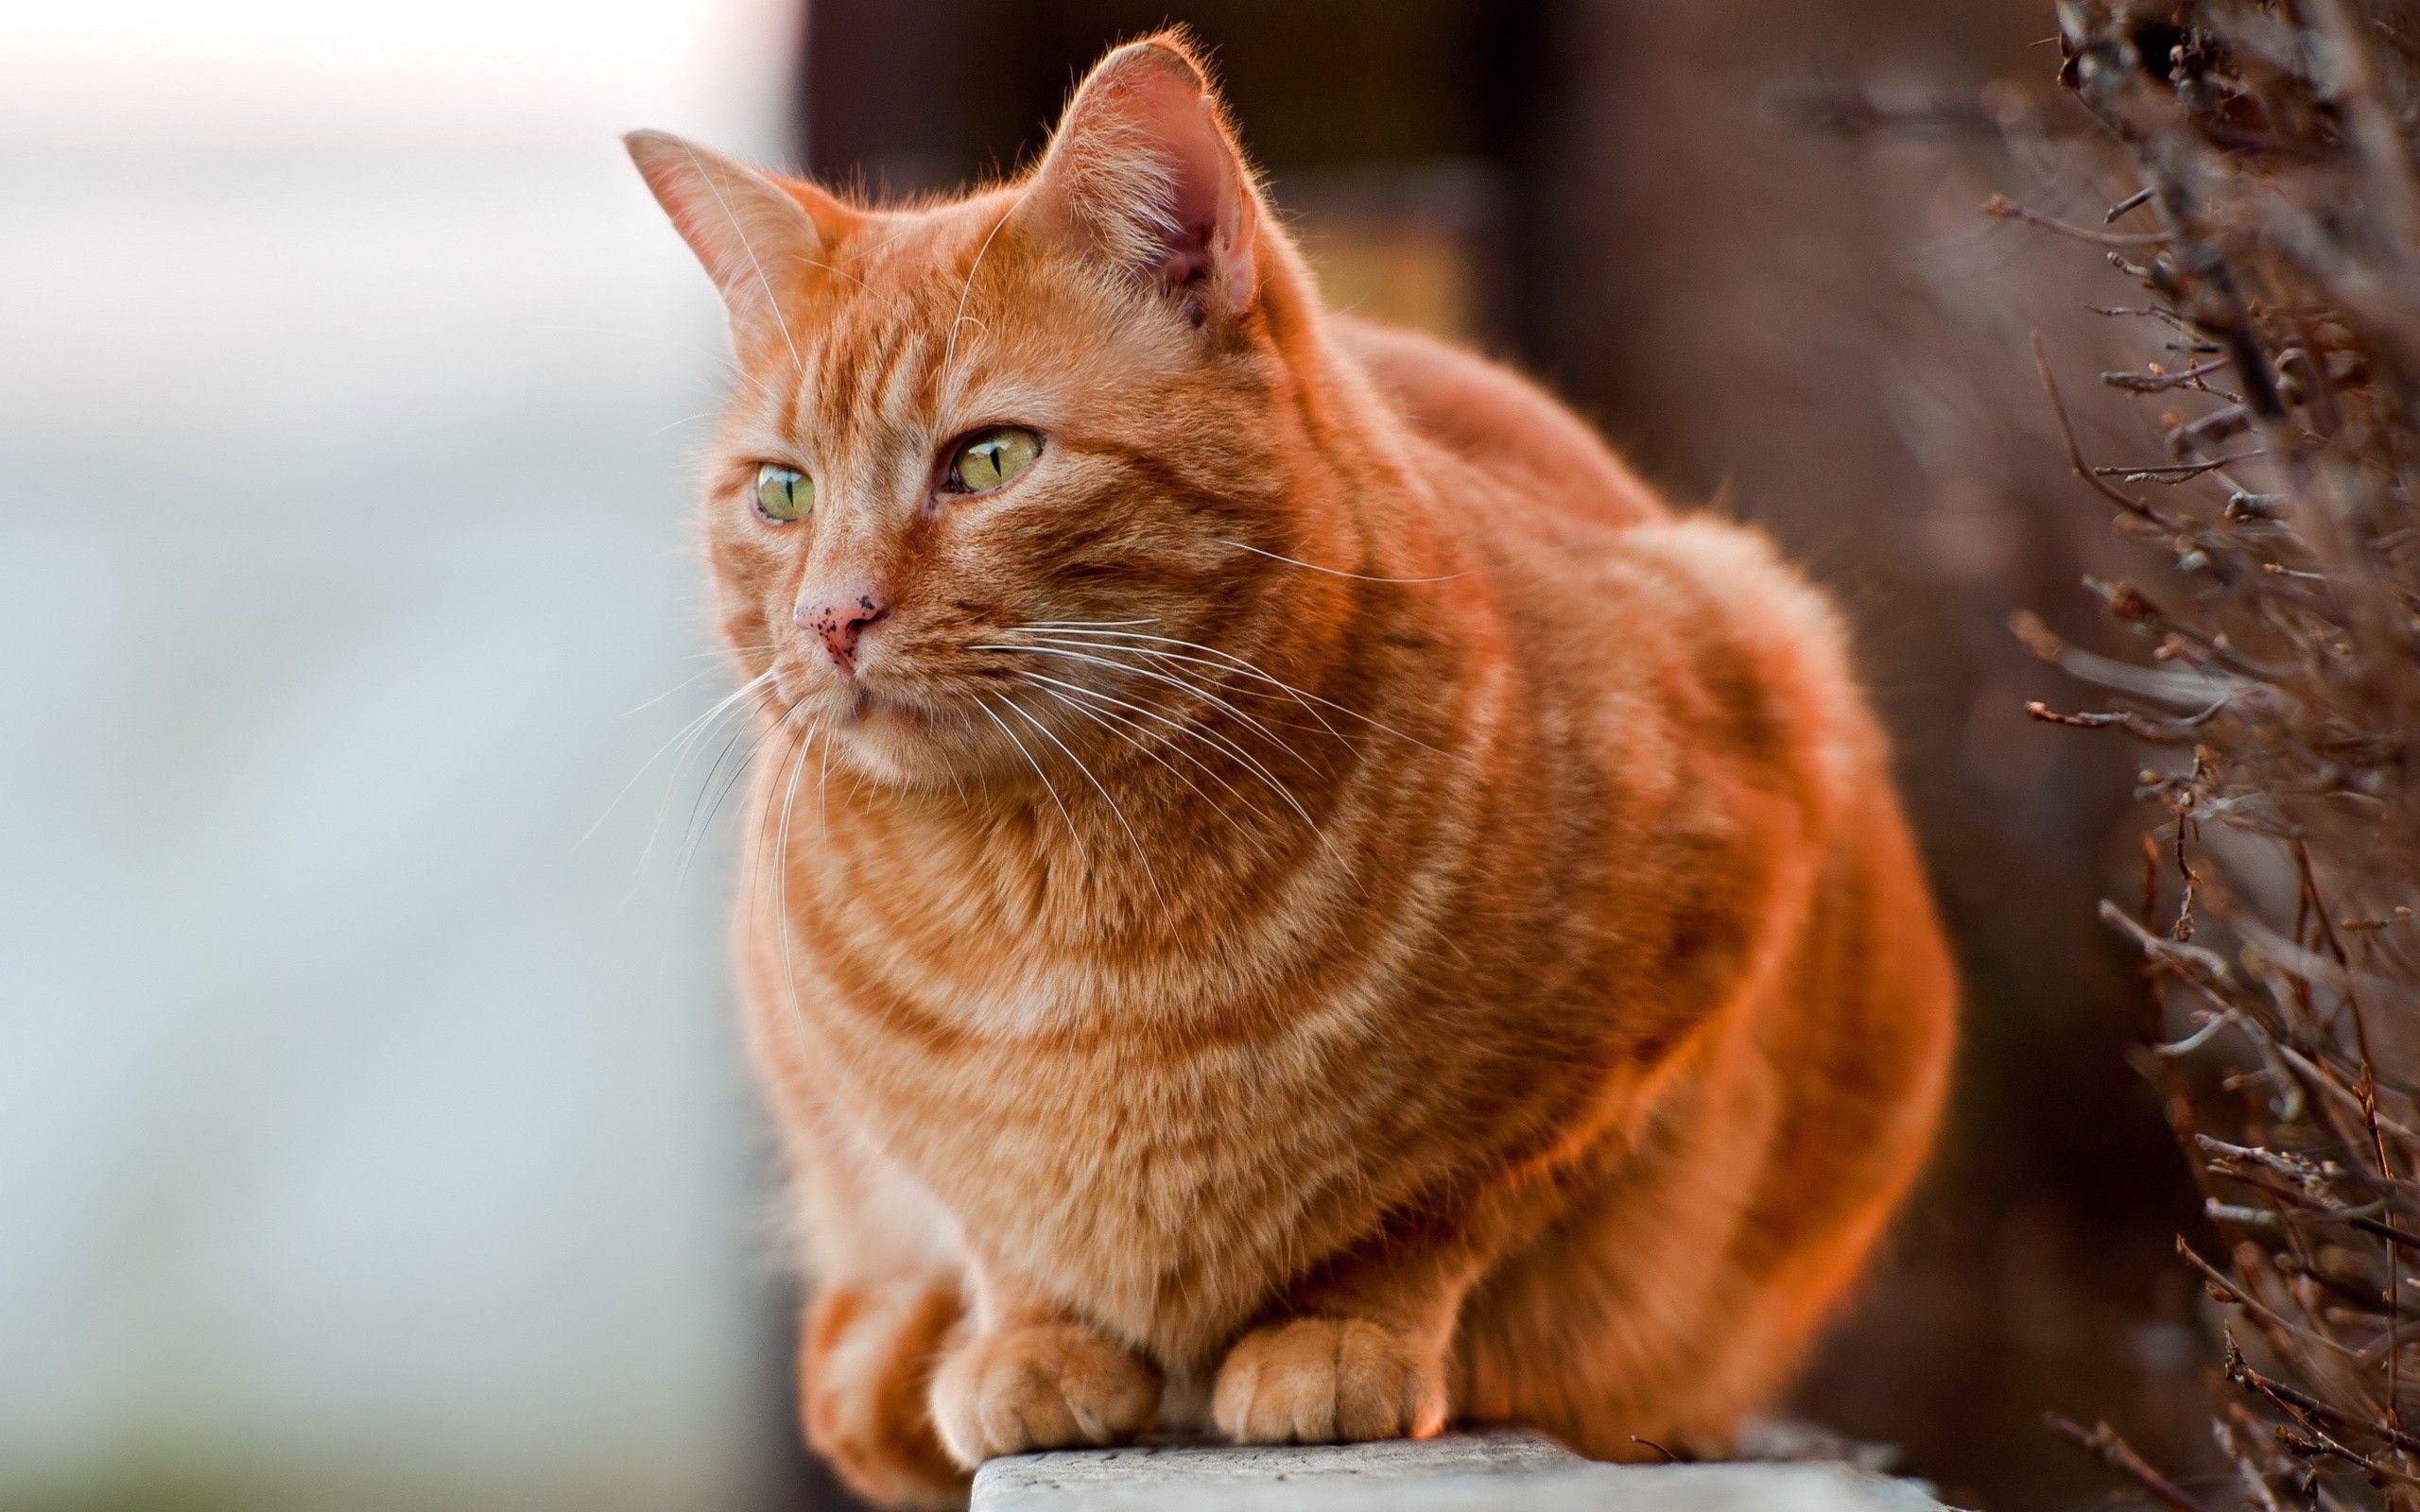 Redhead fat cat wallpaper and image, picture, photo